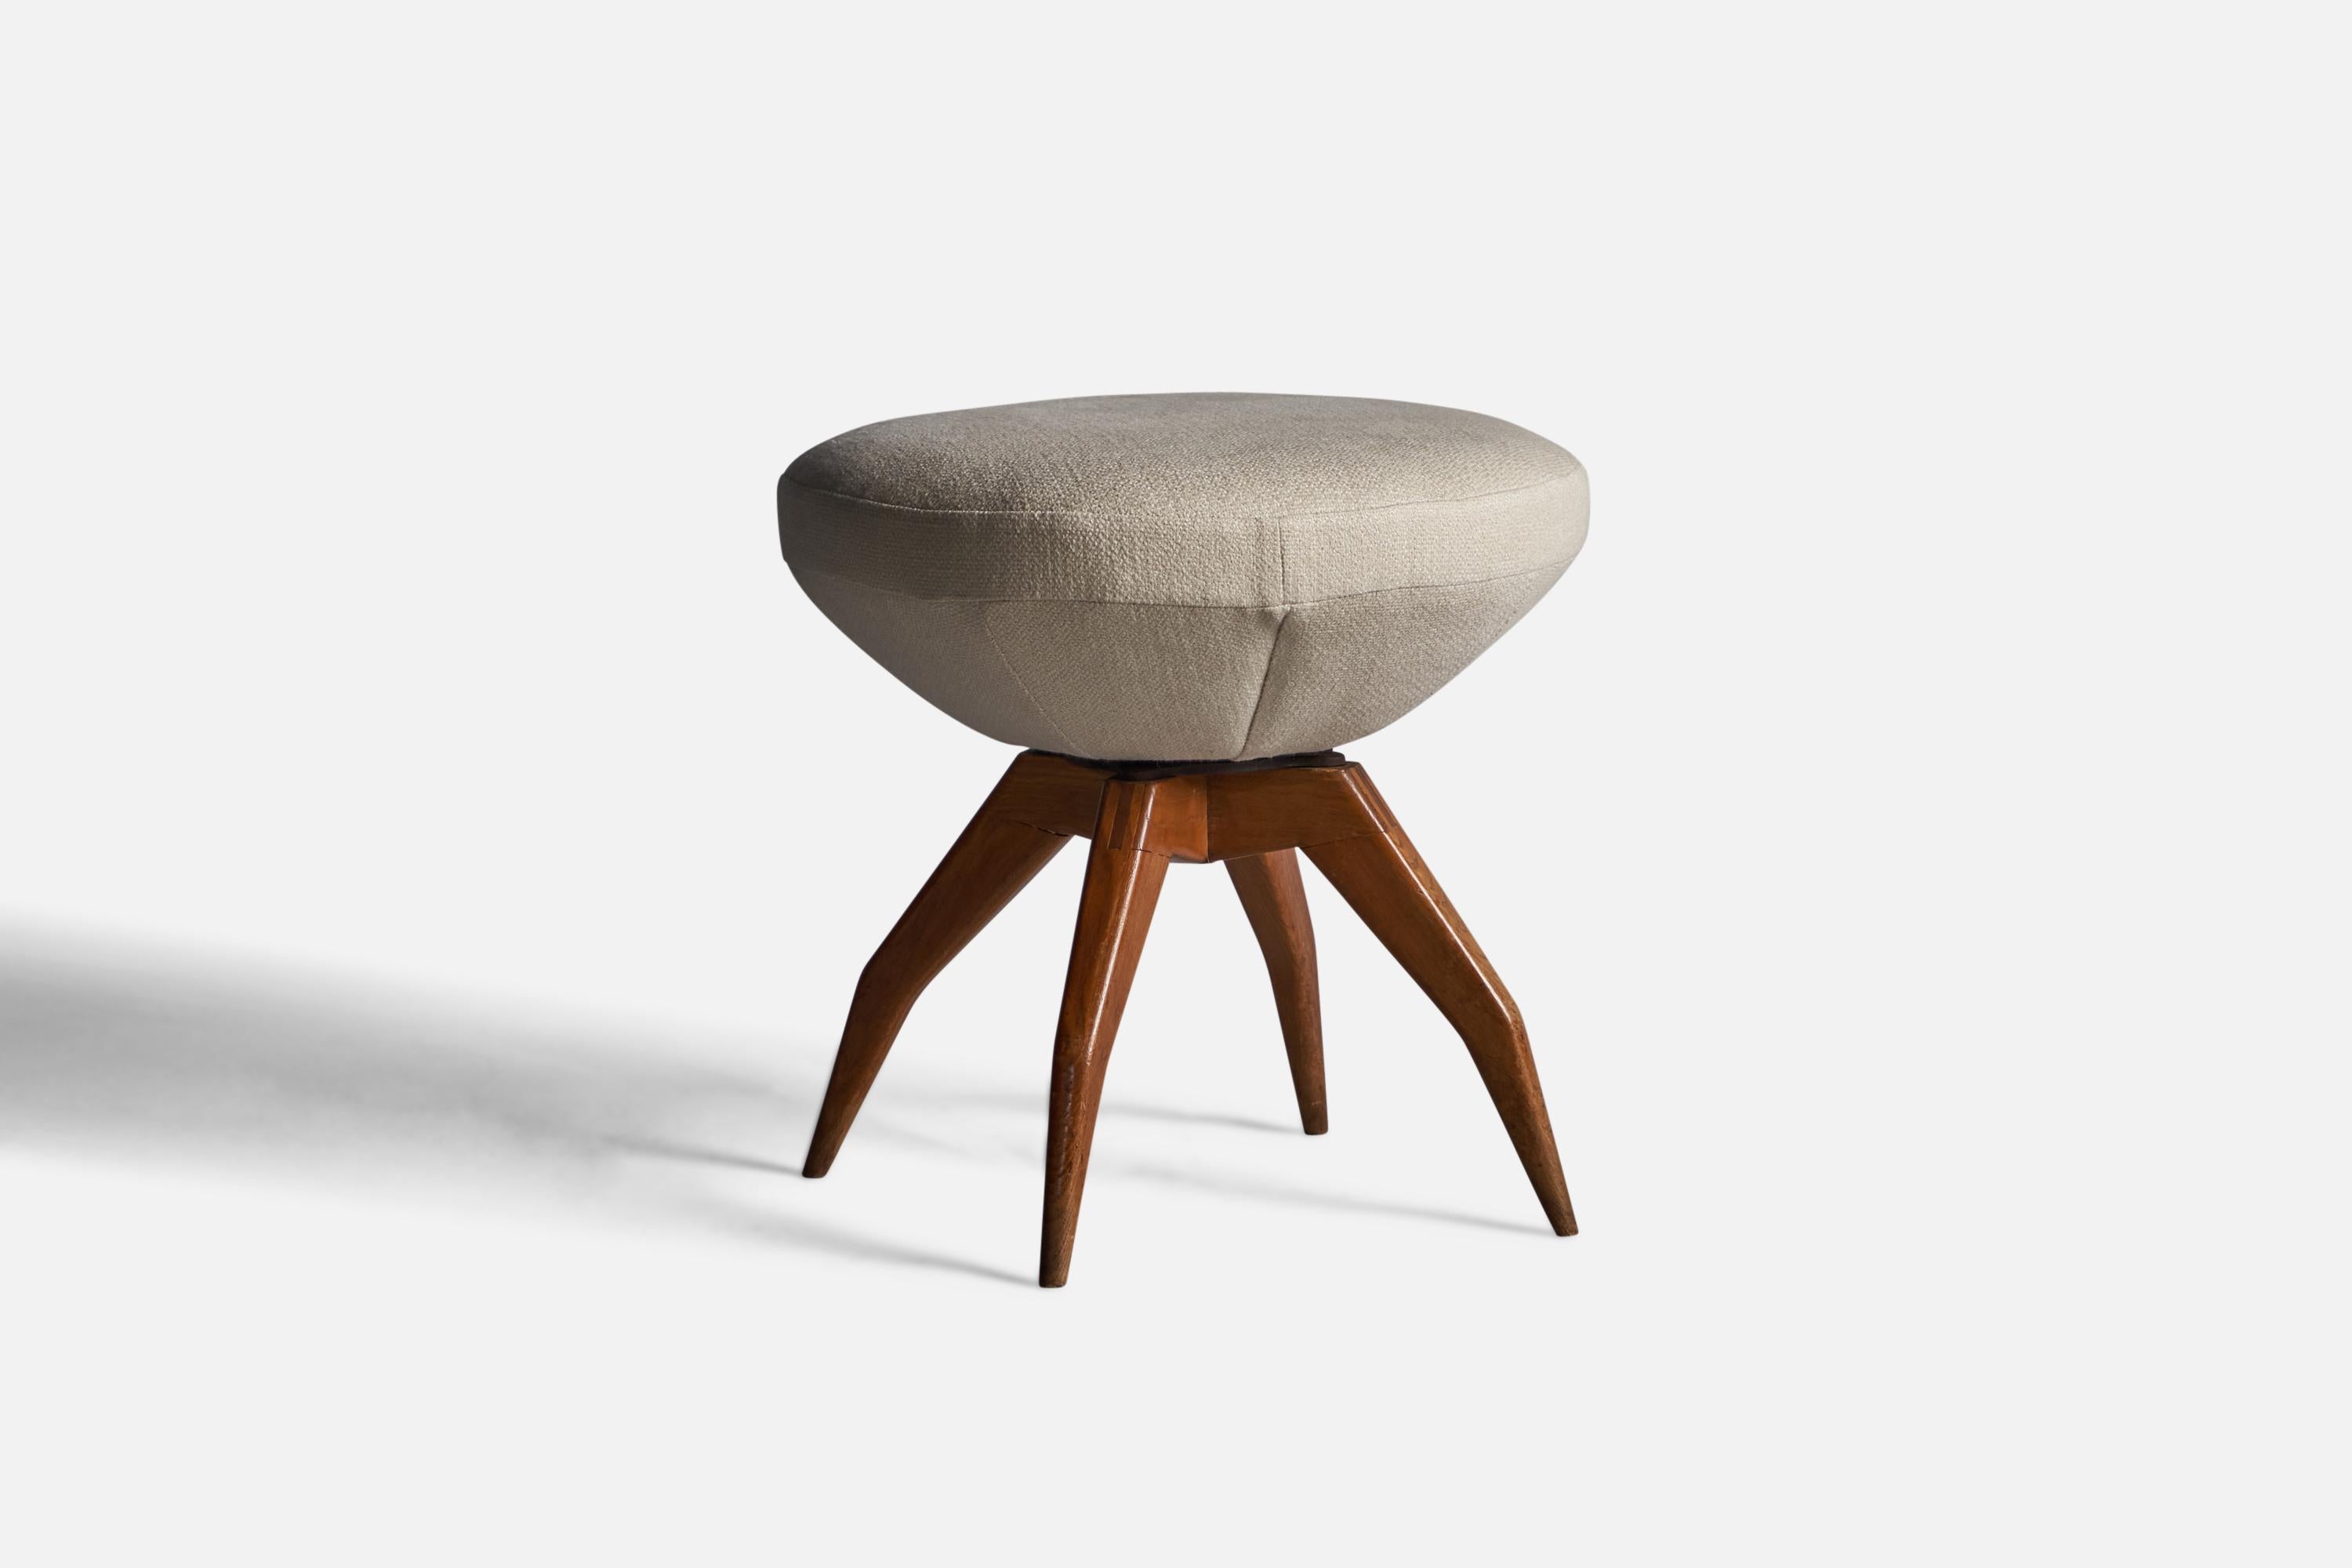 A walnut and beige fabric stool, design attributed to Gio Ponti, Italy, 1950s.